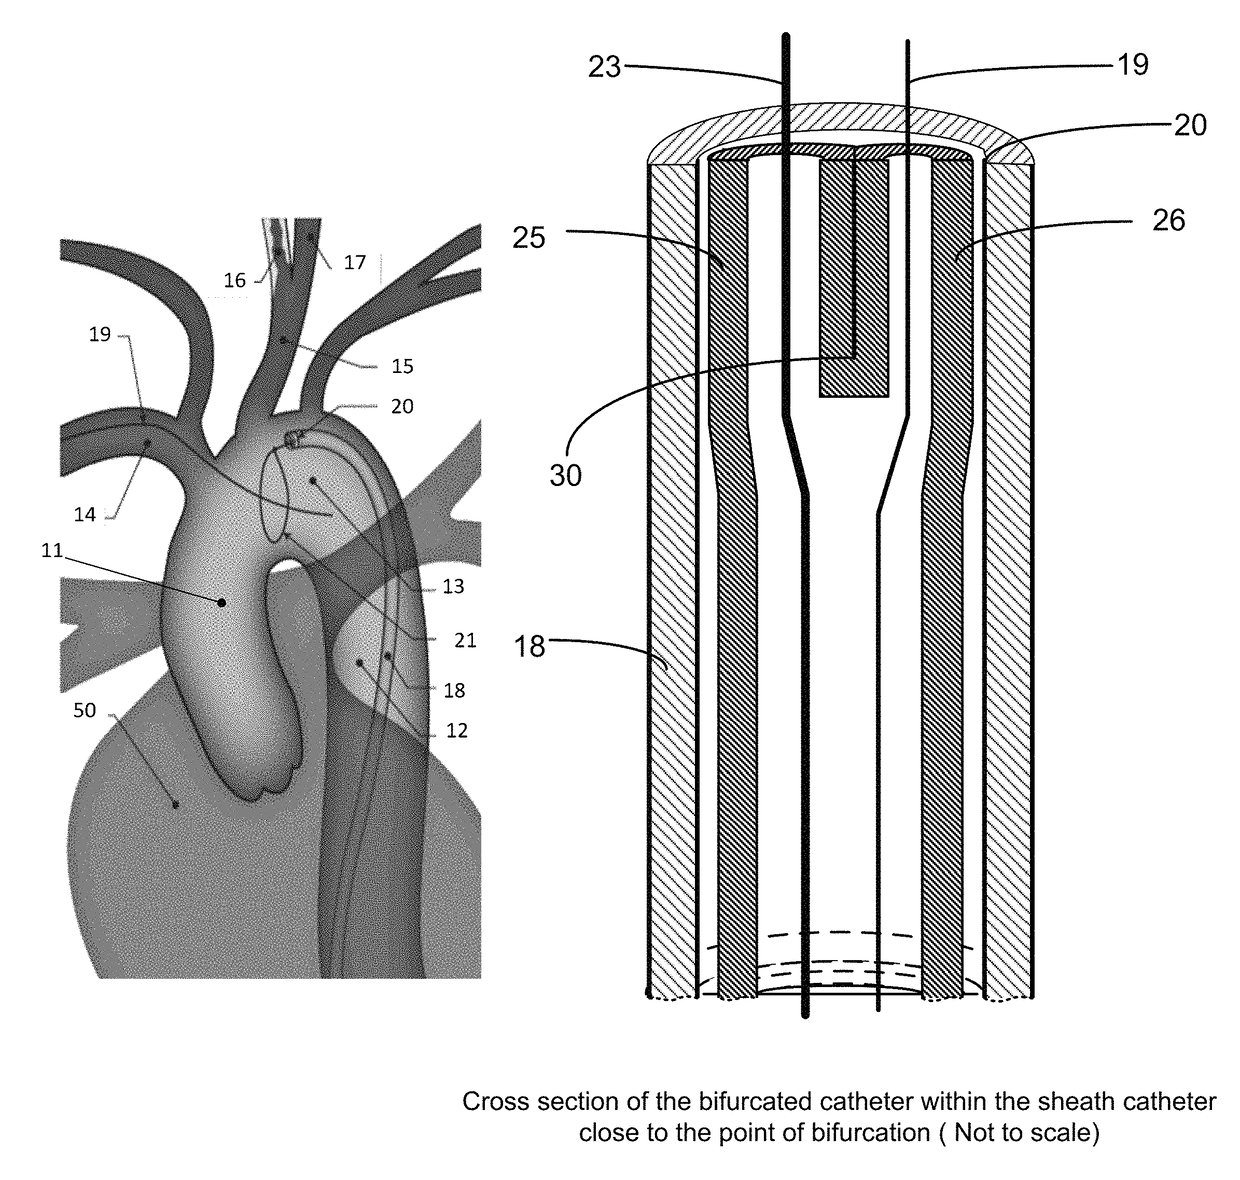 Apparatus and method for a bifurcated catheter for use in hostile aortic arches